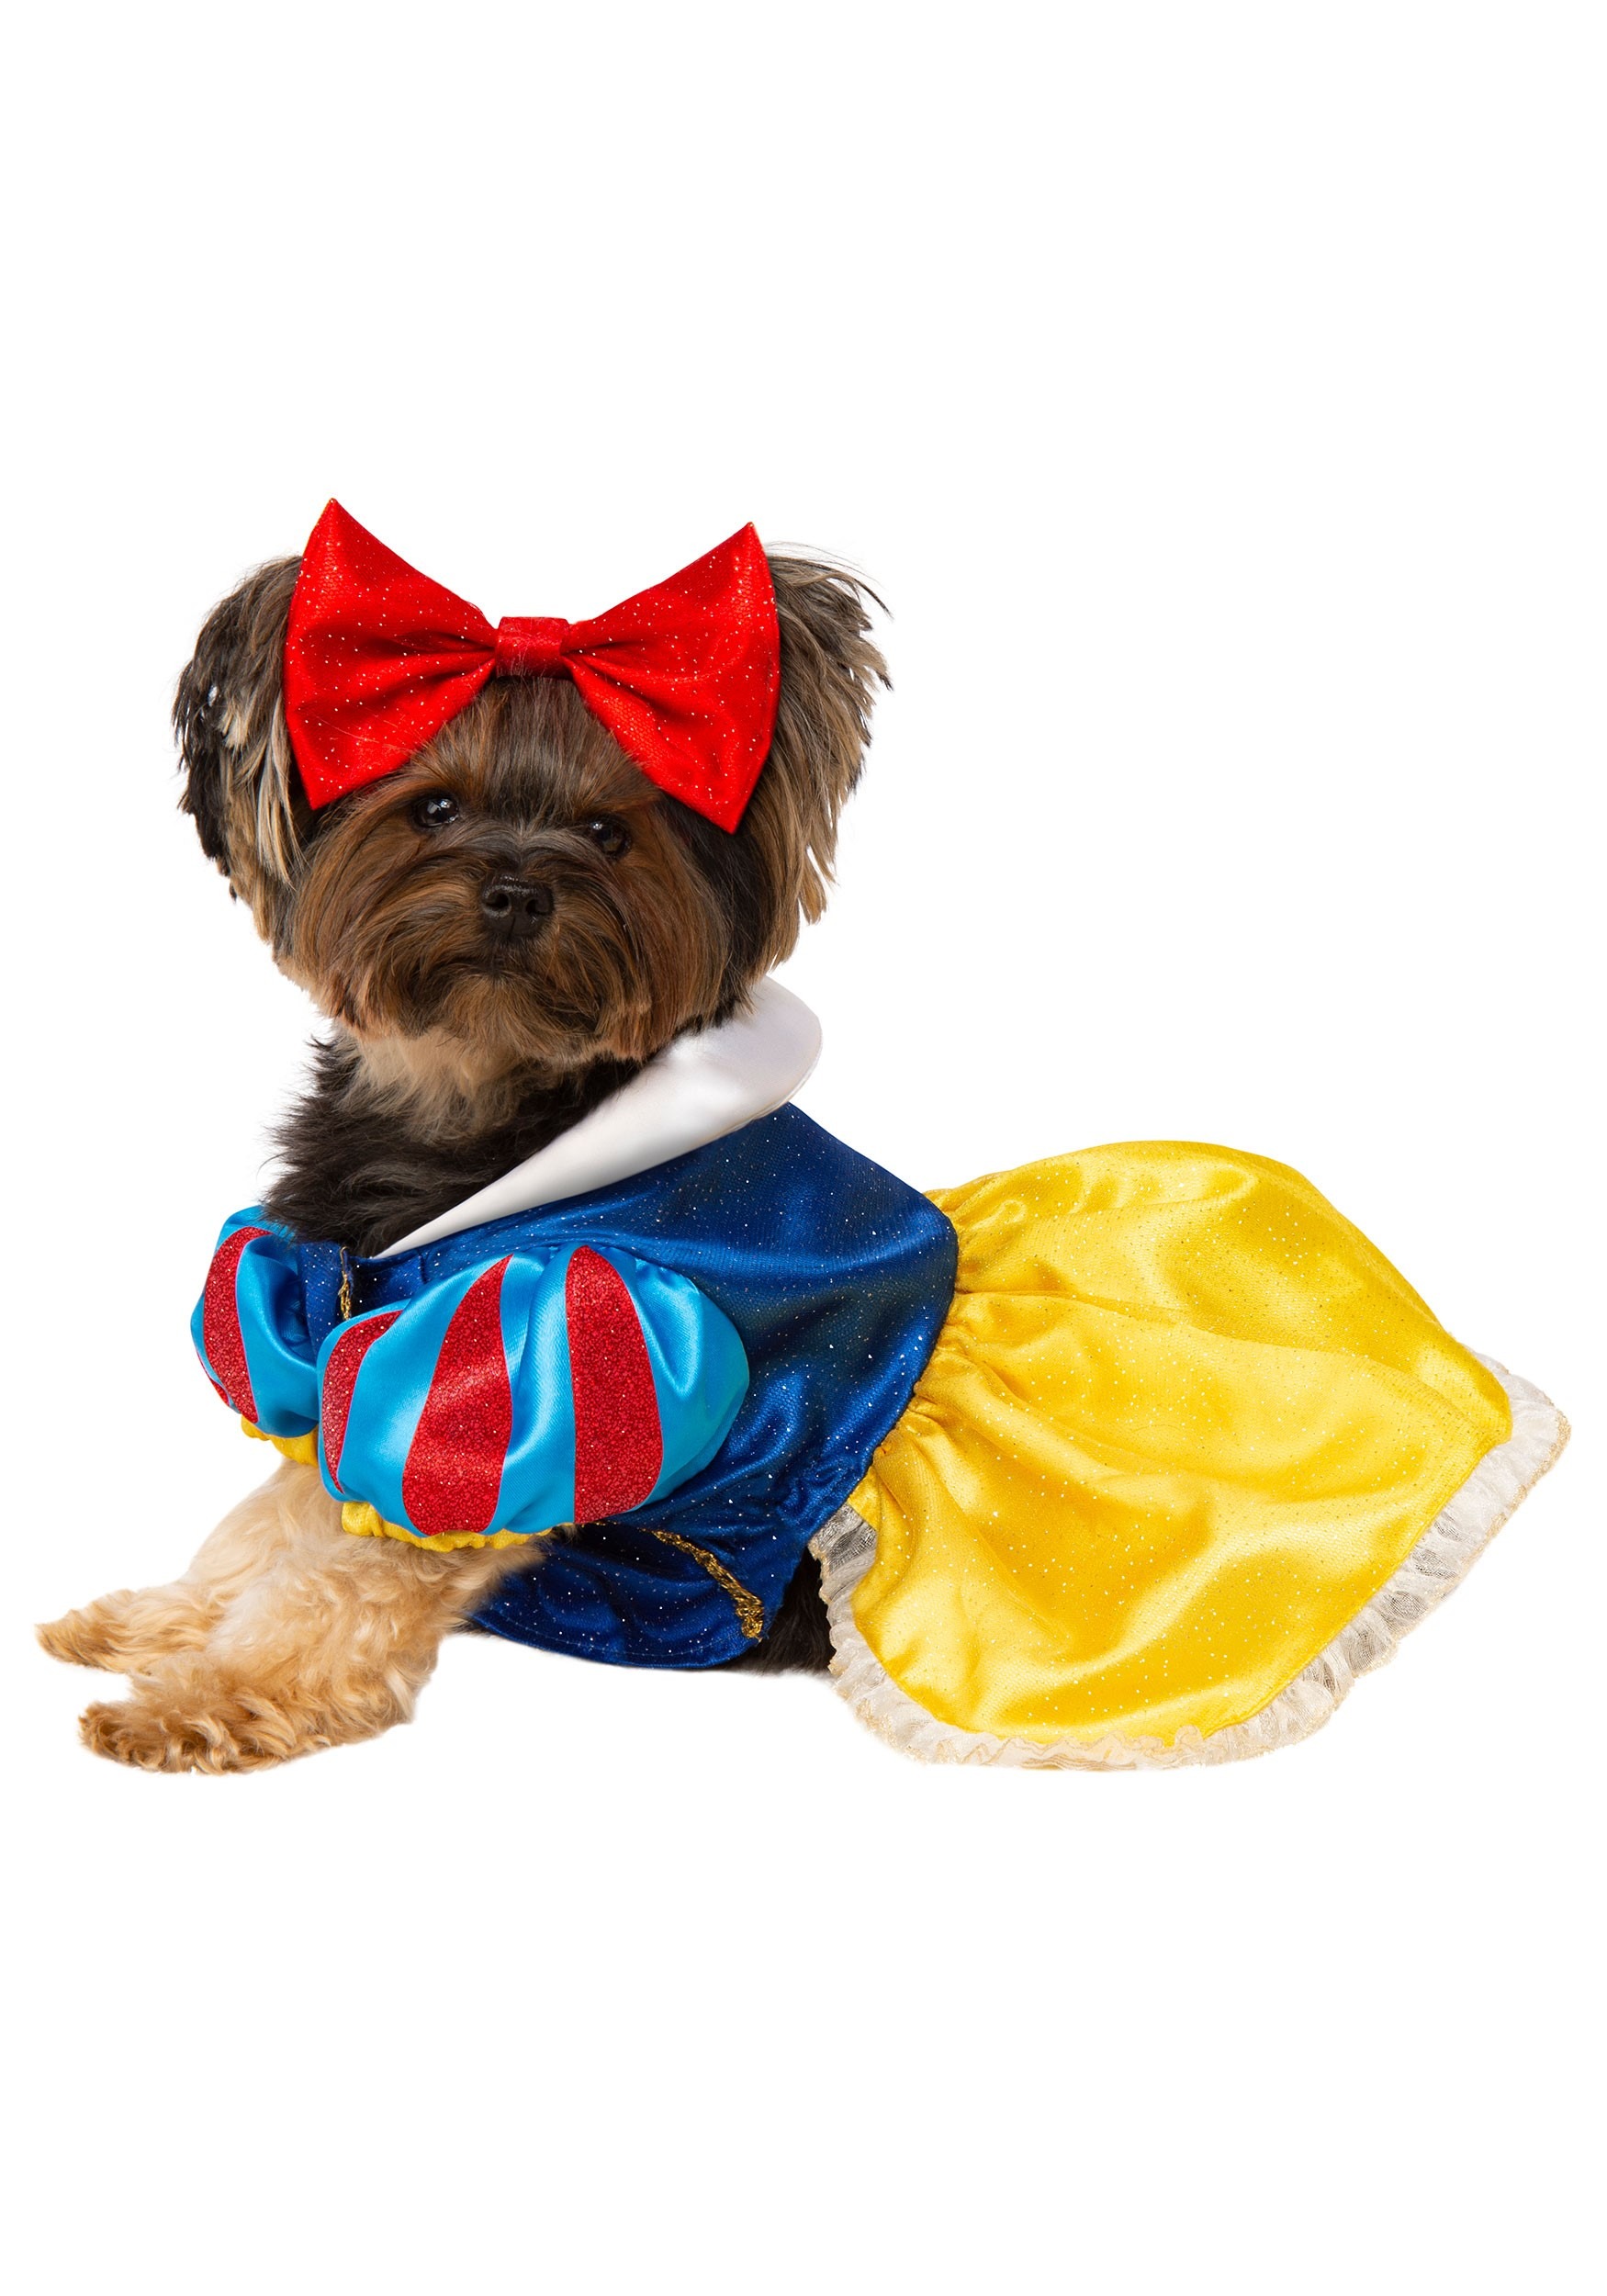 Snow White Fancy Dress Costume For Pets